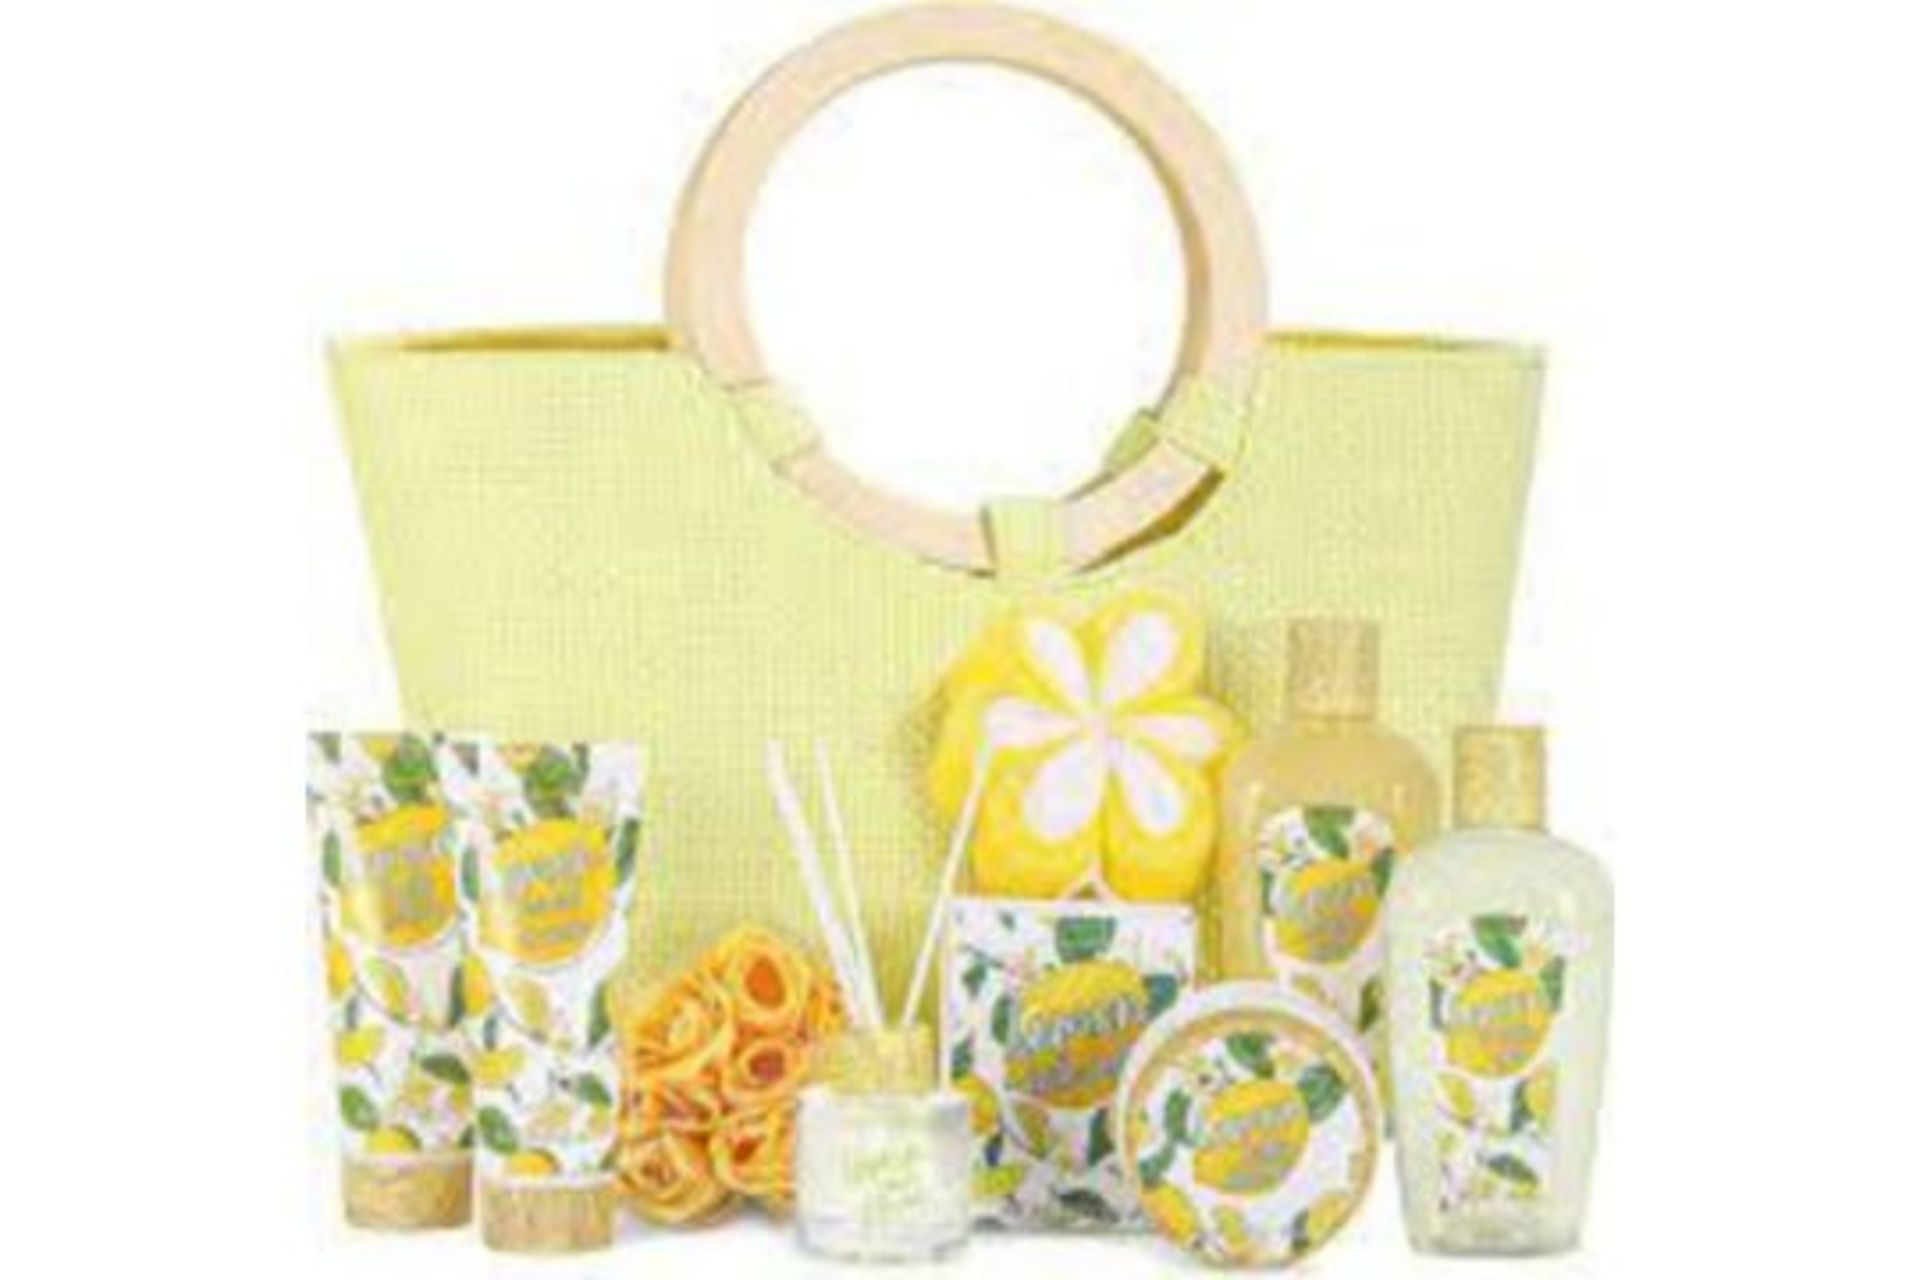 2 X NEW PACKAGED Lemon Everyday Bath Set Tote Gift Sets. (ROW10/11RACK). Home Spa Kit Meets Your All